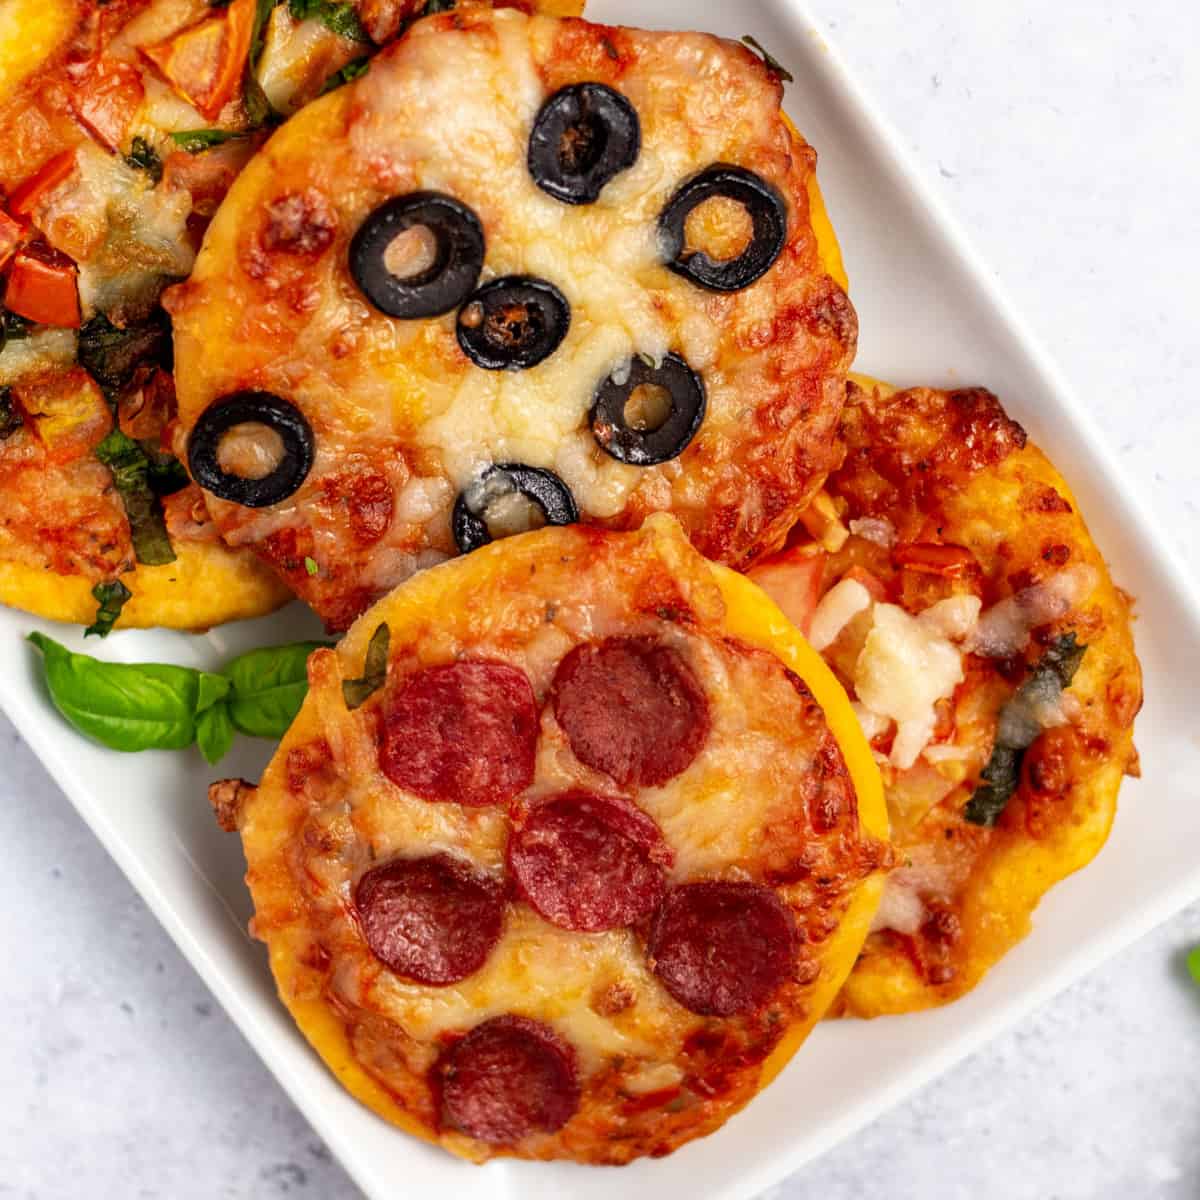 Air Fryer Mini Pizza in 10 Minutes - Tasty Oven